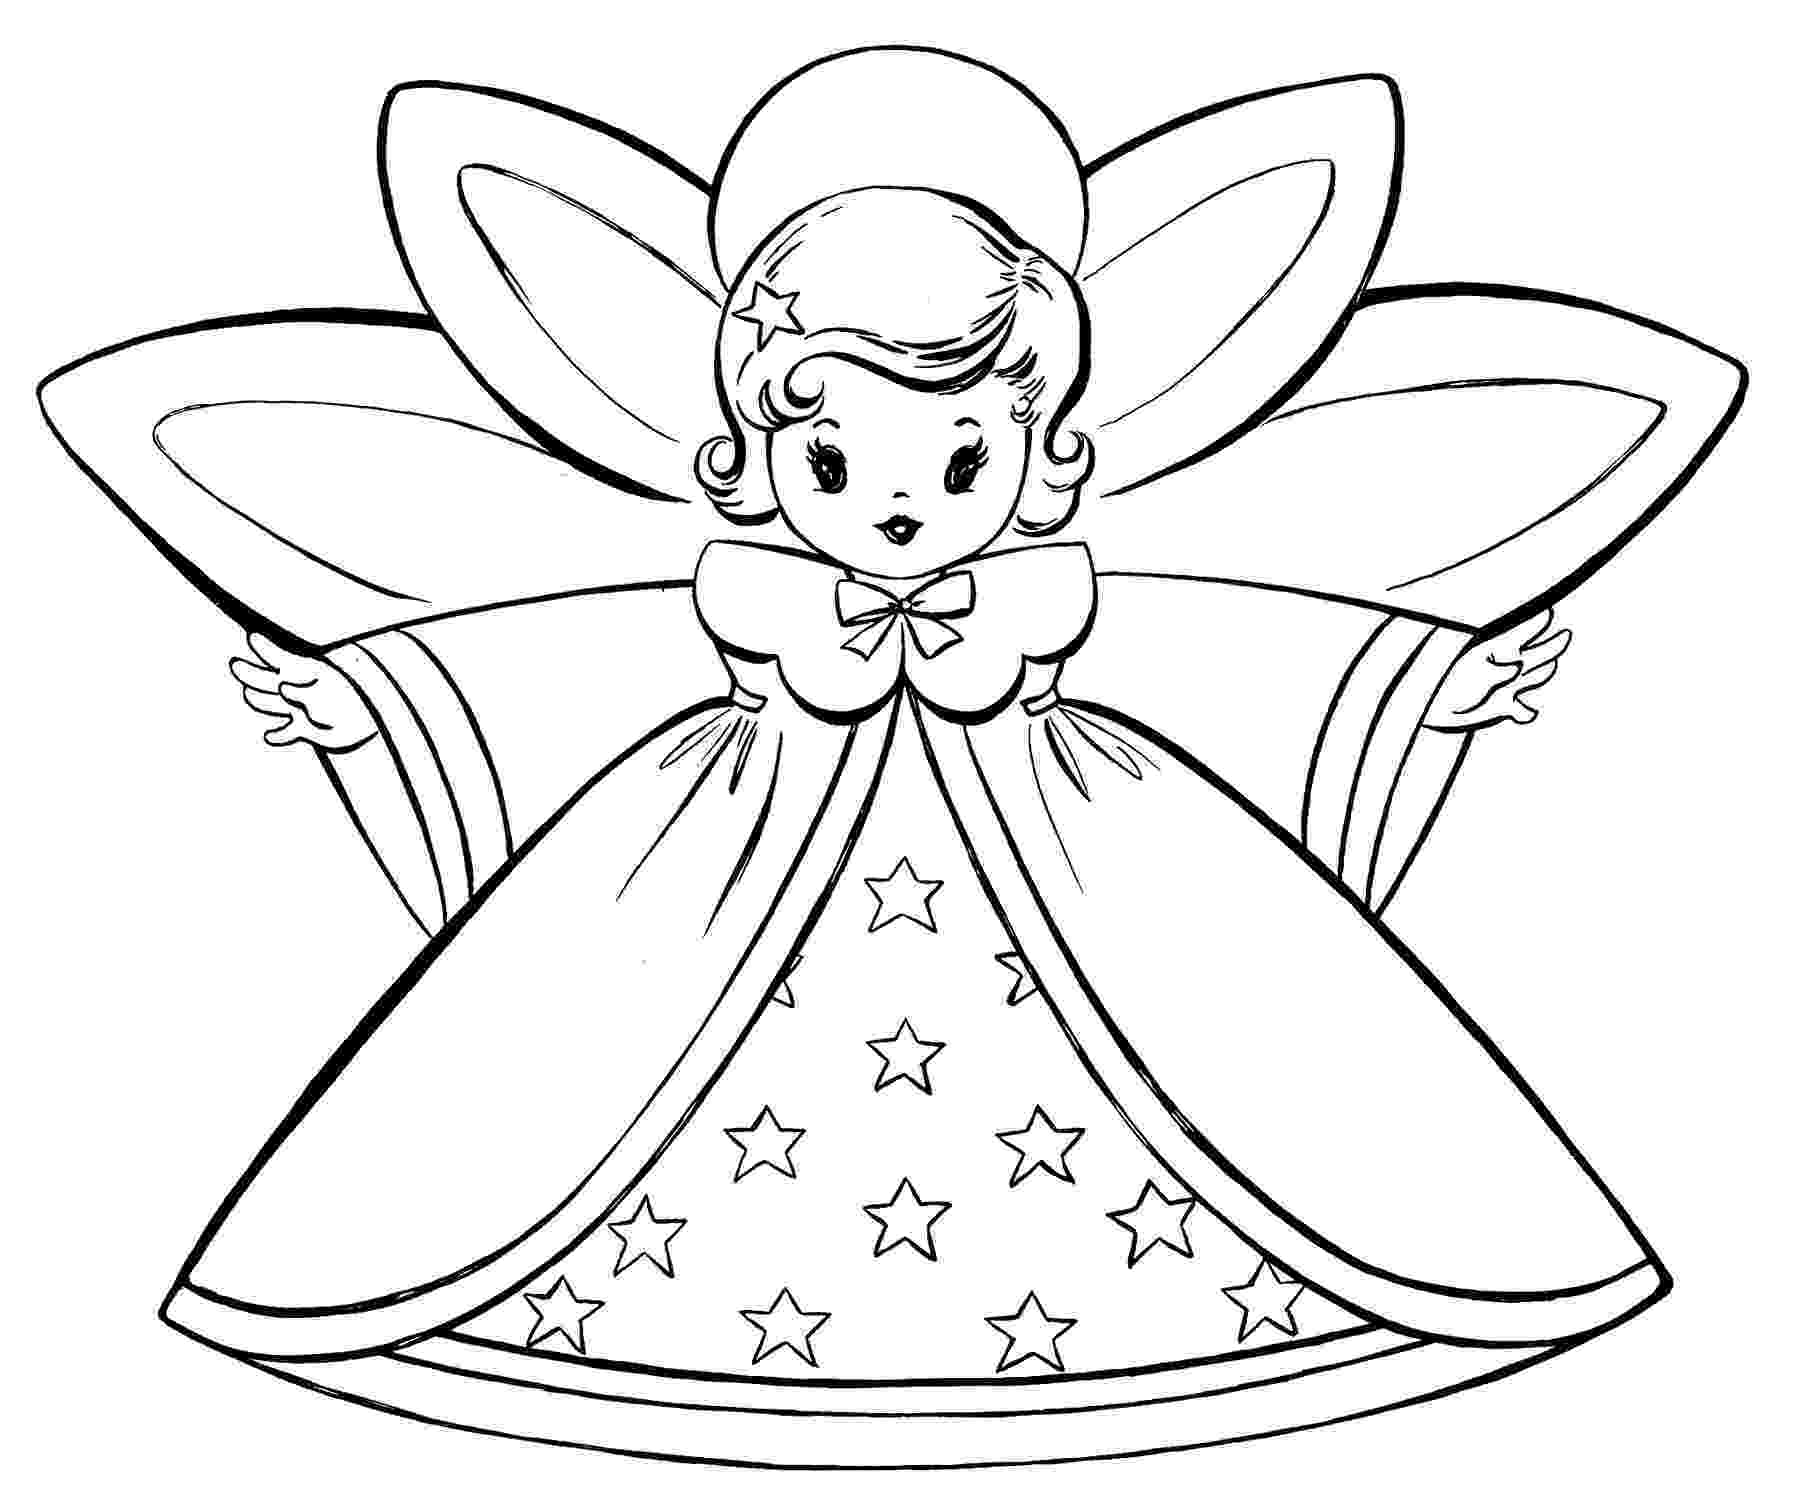 christmas couloring pages 5 christmas coloring pages your kids will love christmas pages couloring 